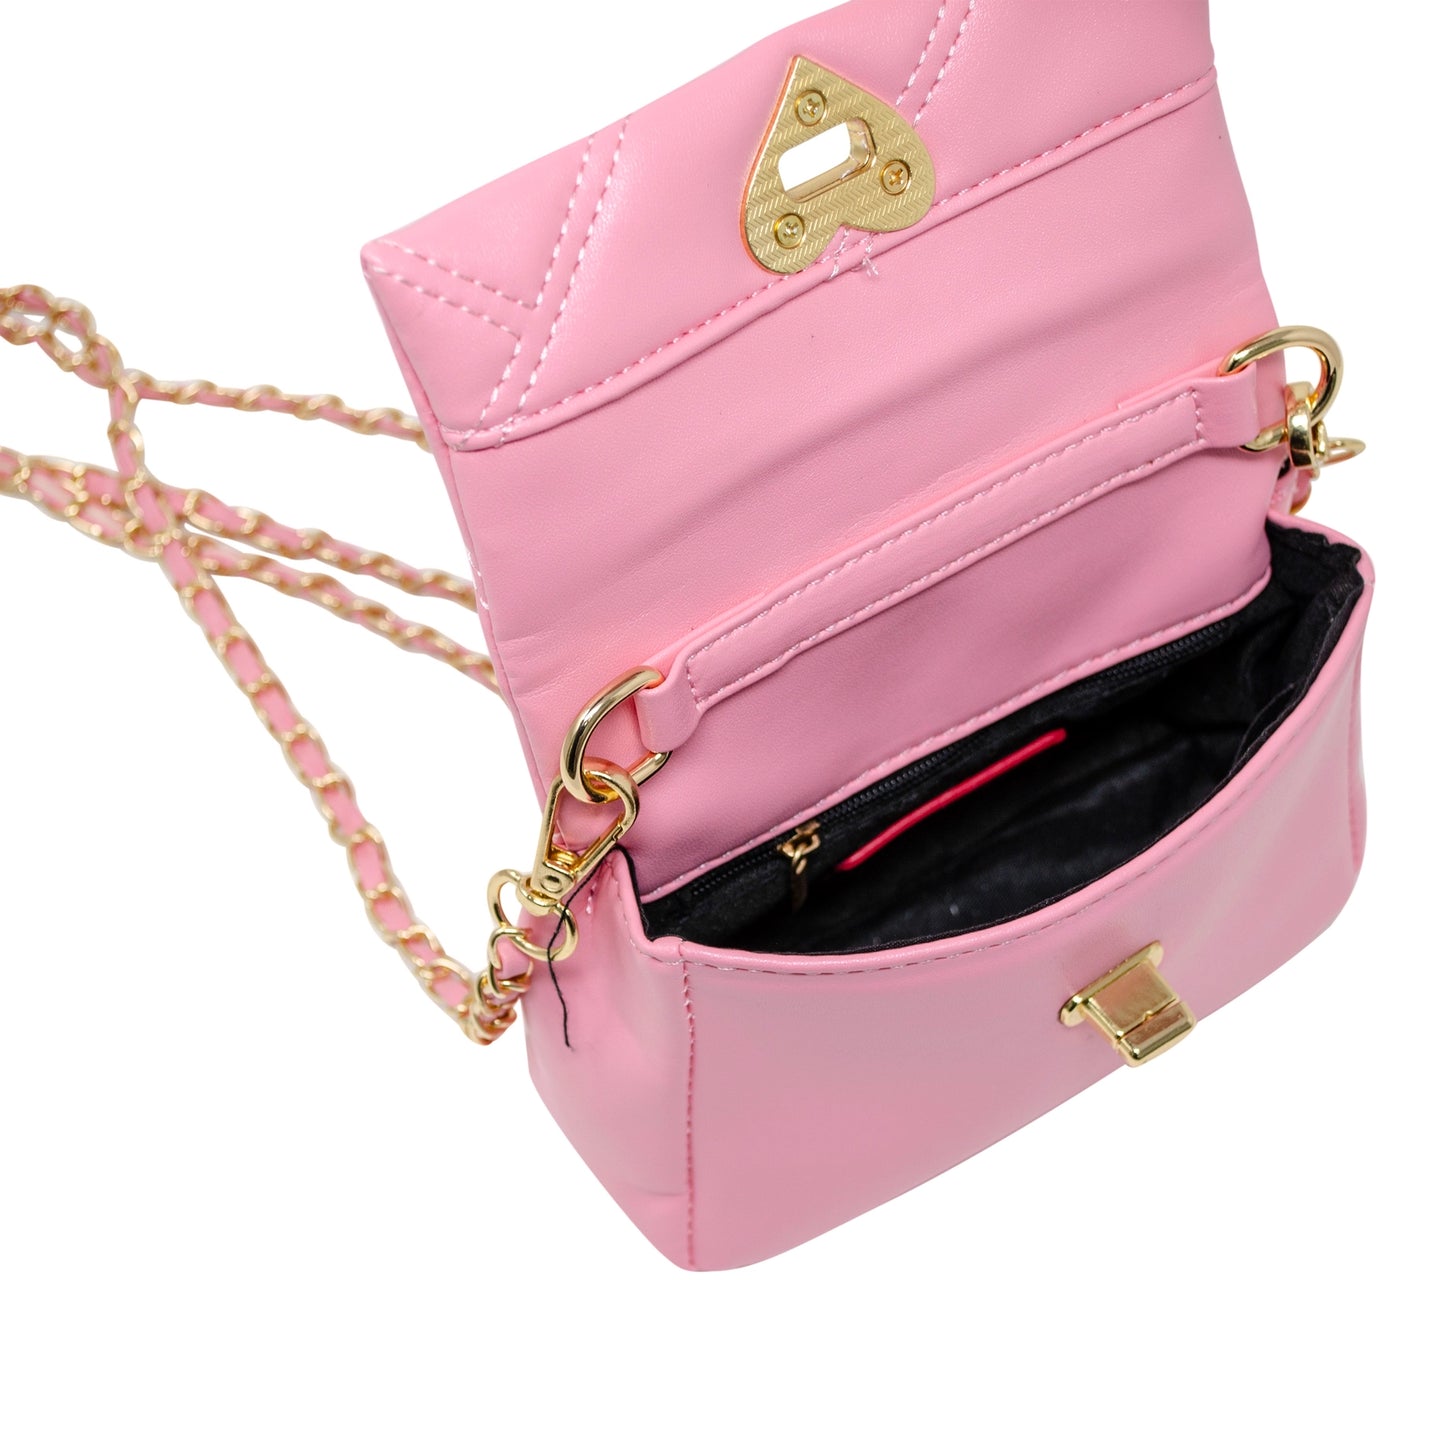 Quilted Soft Heart Lock Purse - Pink